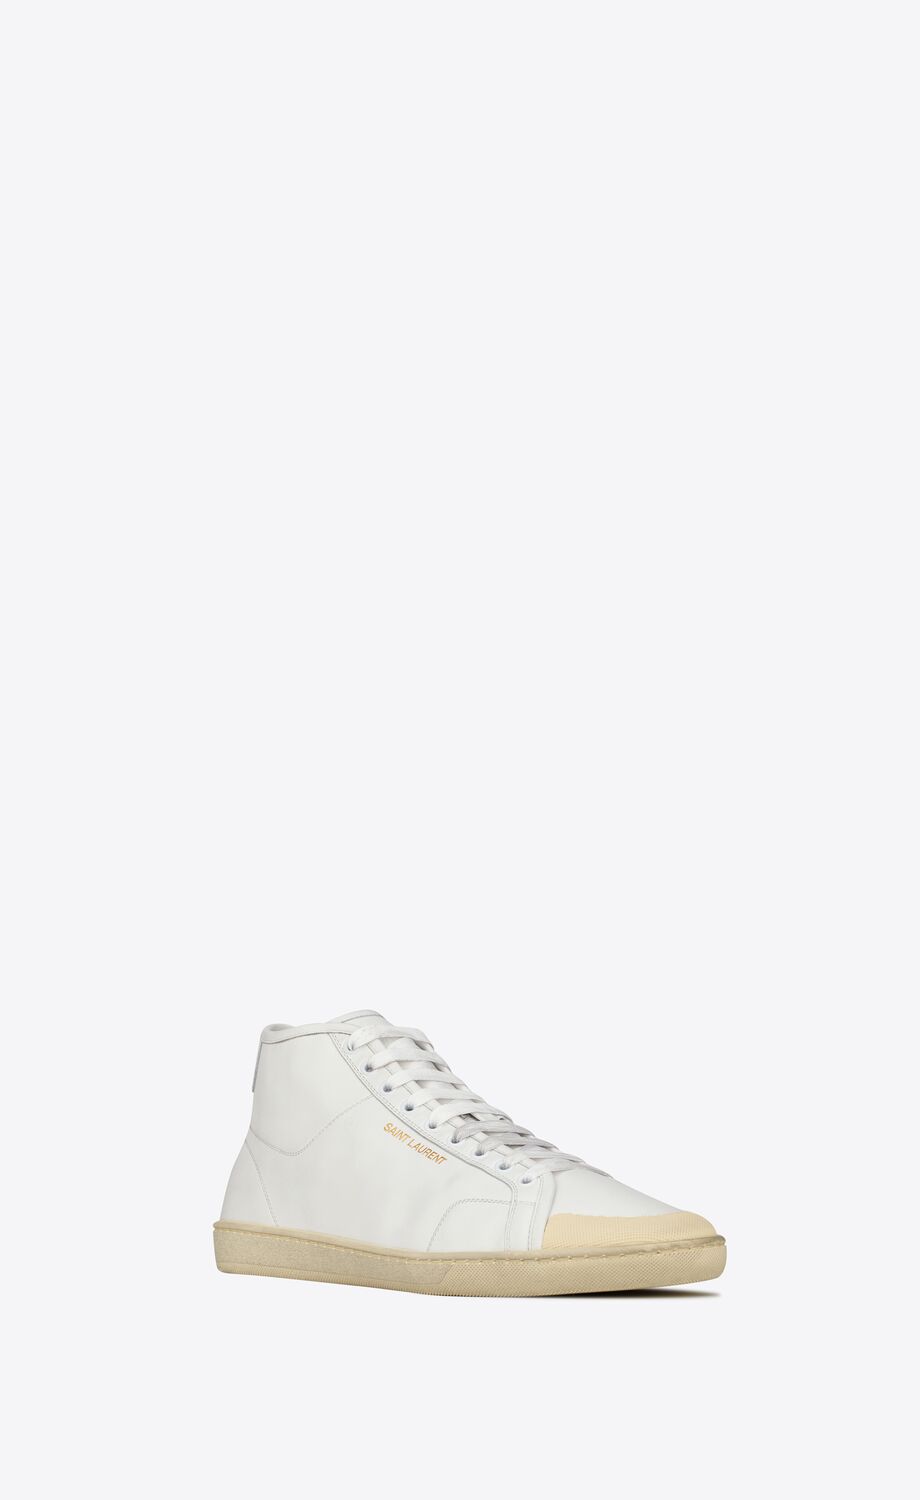 COURT CLASSIC SL/39 mid-top sneakers in grained leather | Saint Laurent ...